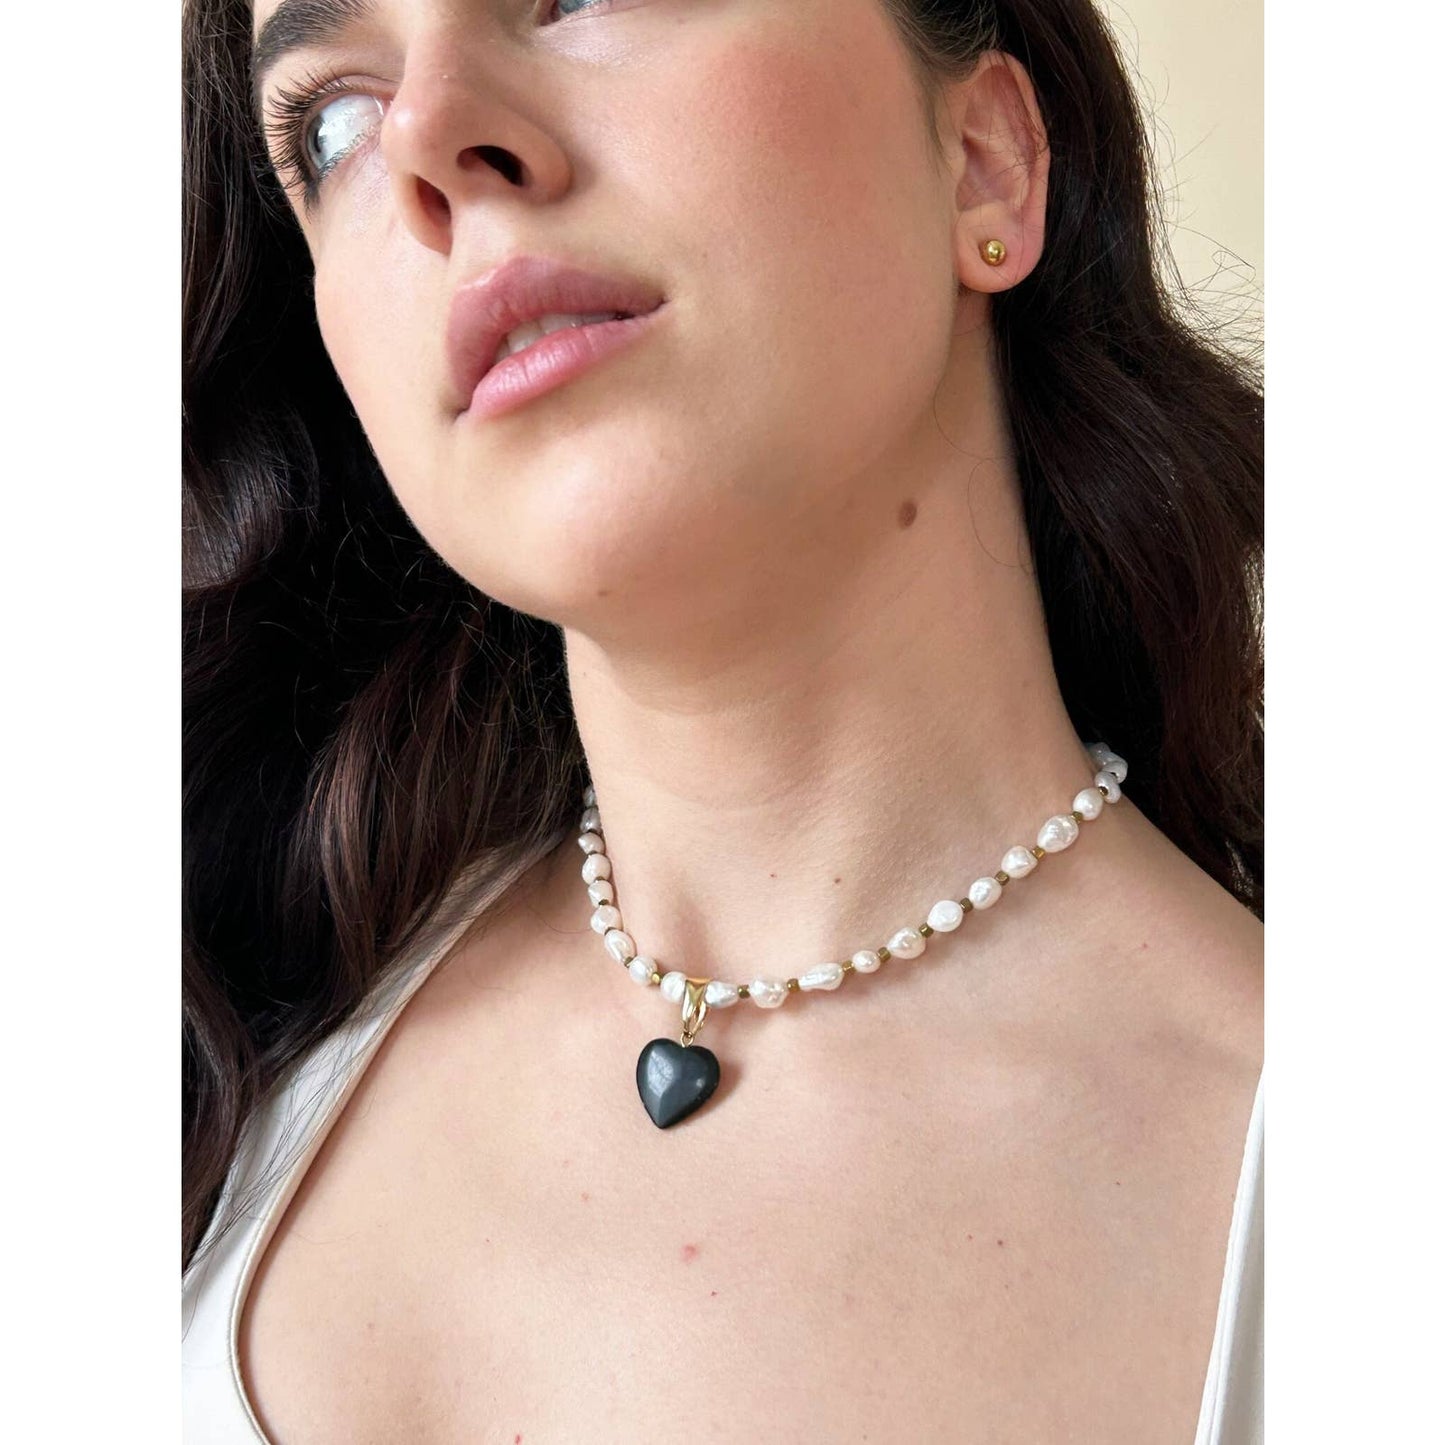 Handmade Freshwater Pearl Stone Heart Charm Necklace